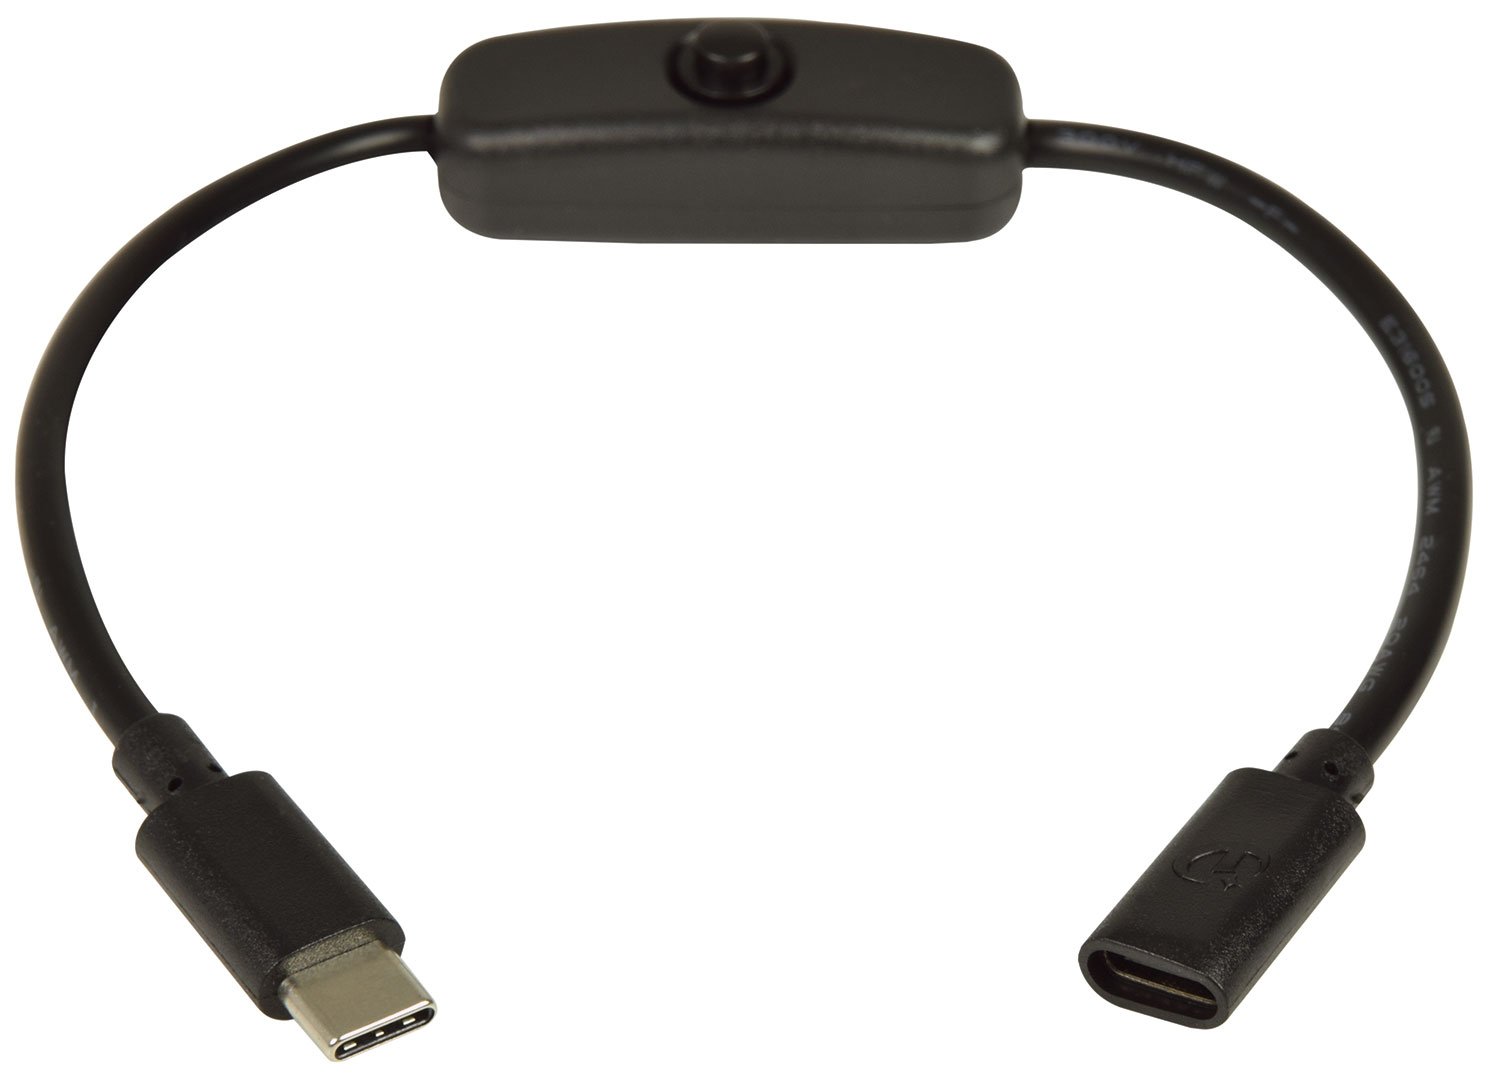 AV Link USB Extension Cable with Power Switch